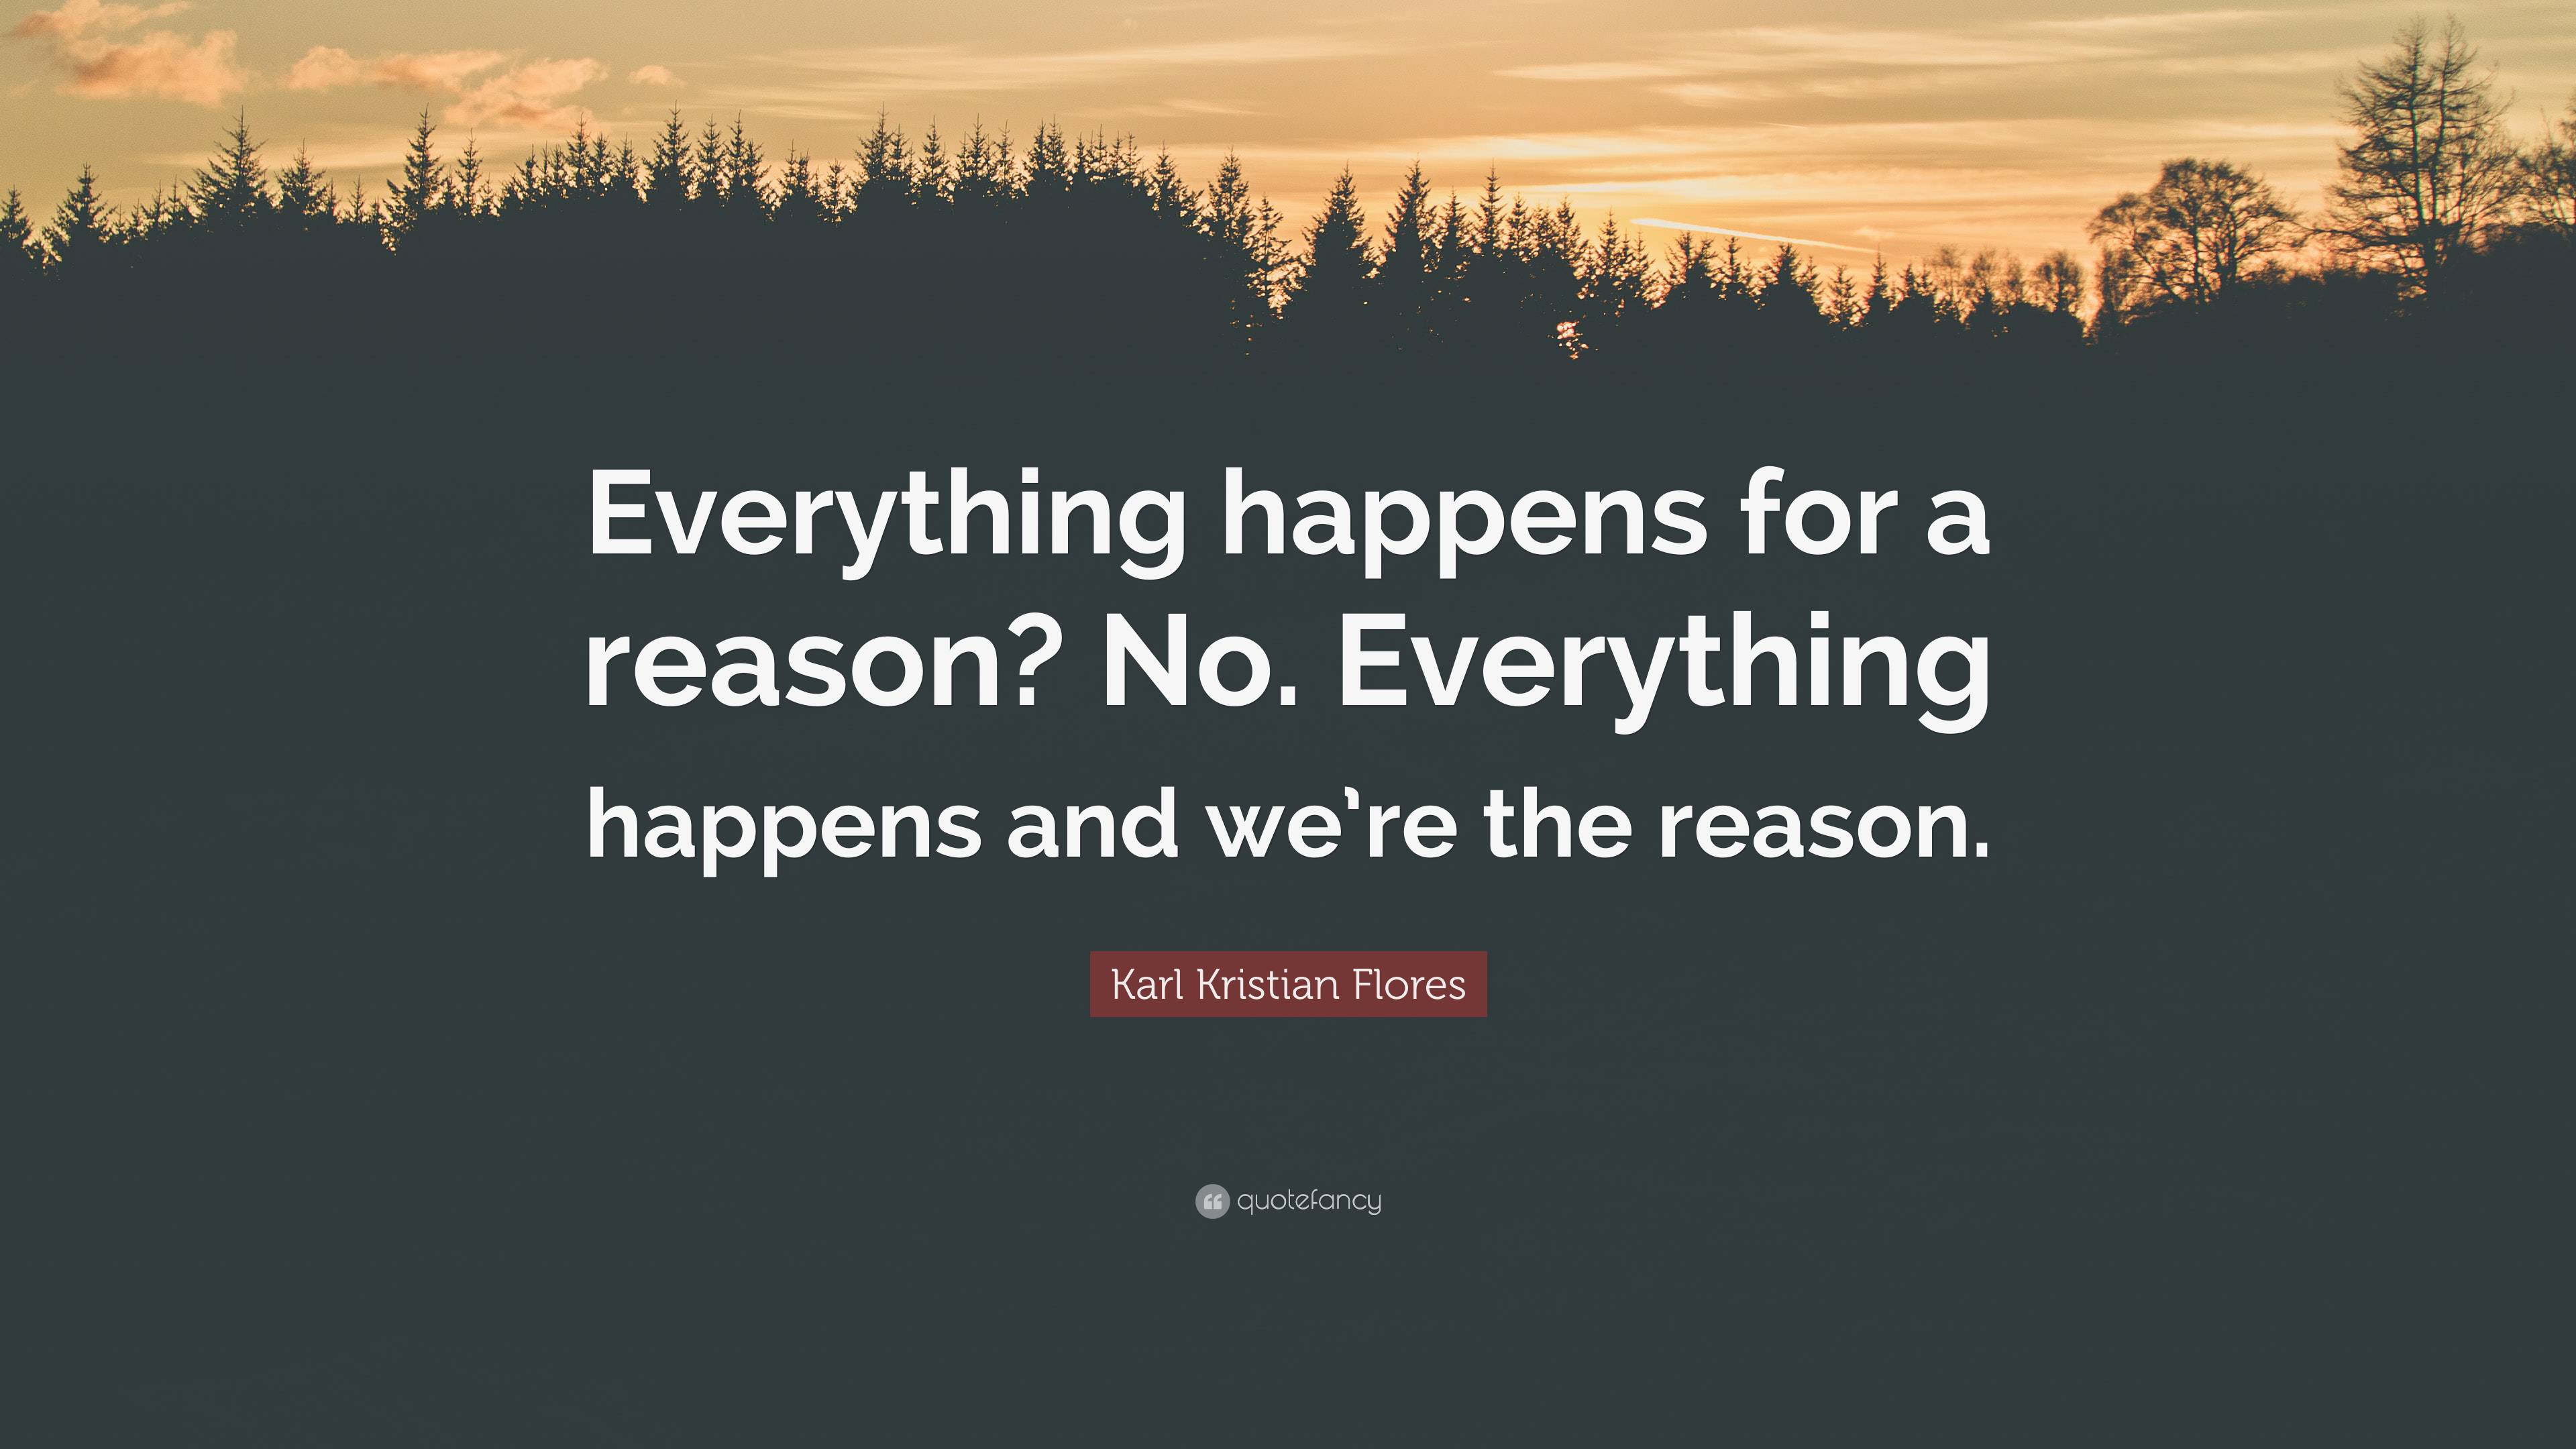 Karl Kristian Flores Quote “Everything happens for a reason? No